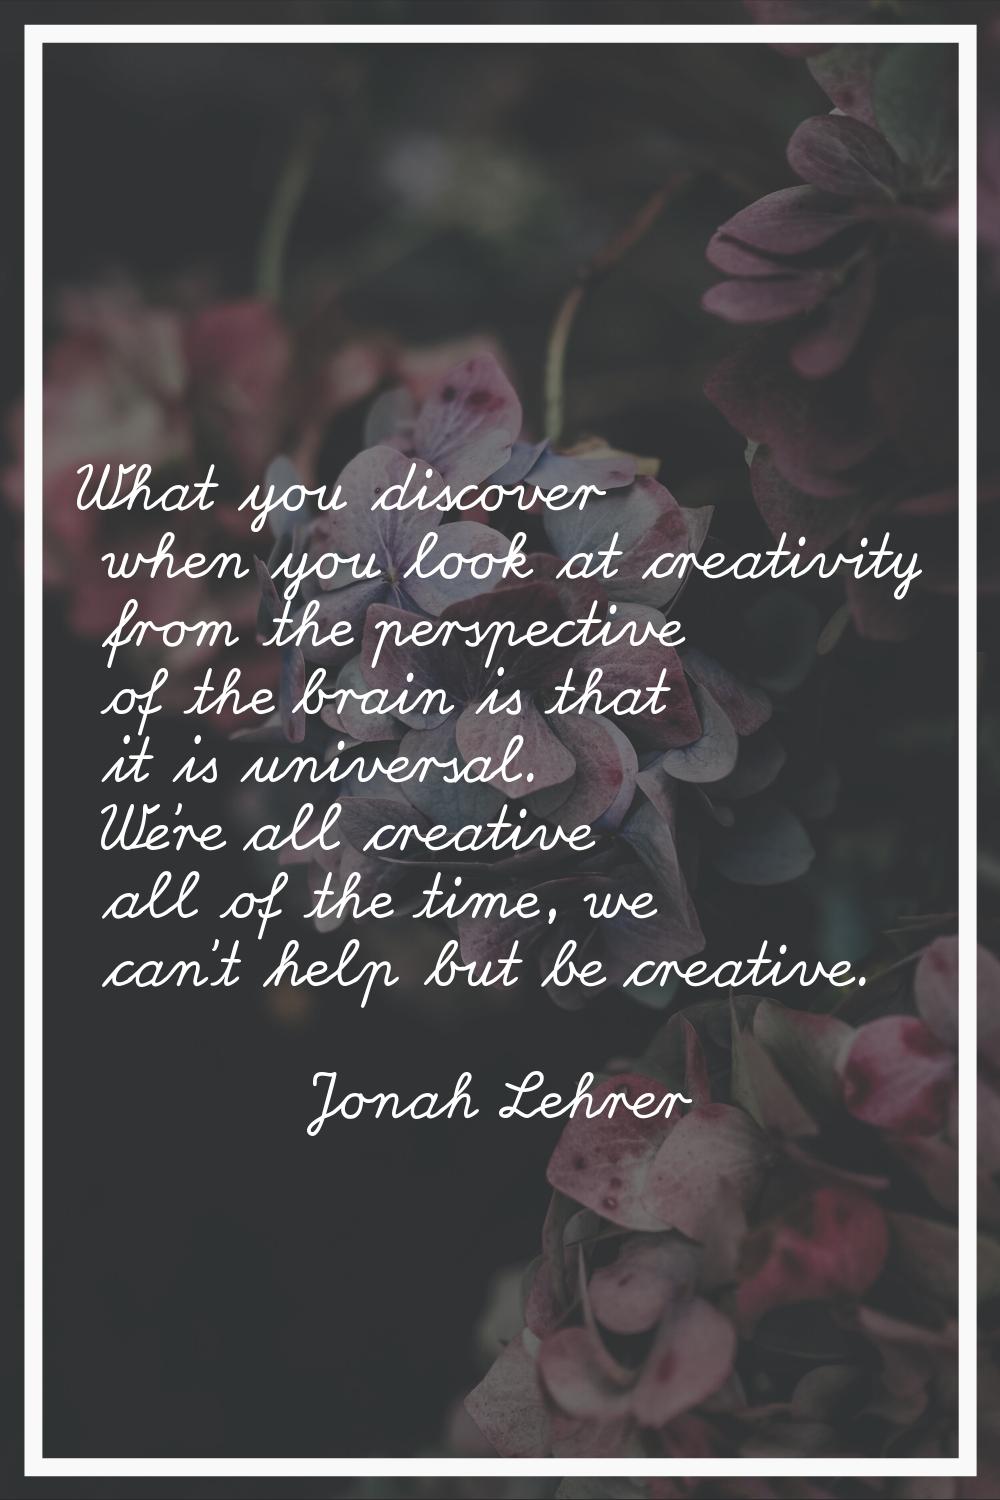 What you discover when you look at creativity from the perspective of the brain is that it is unive